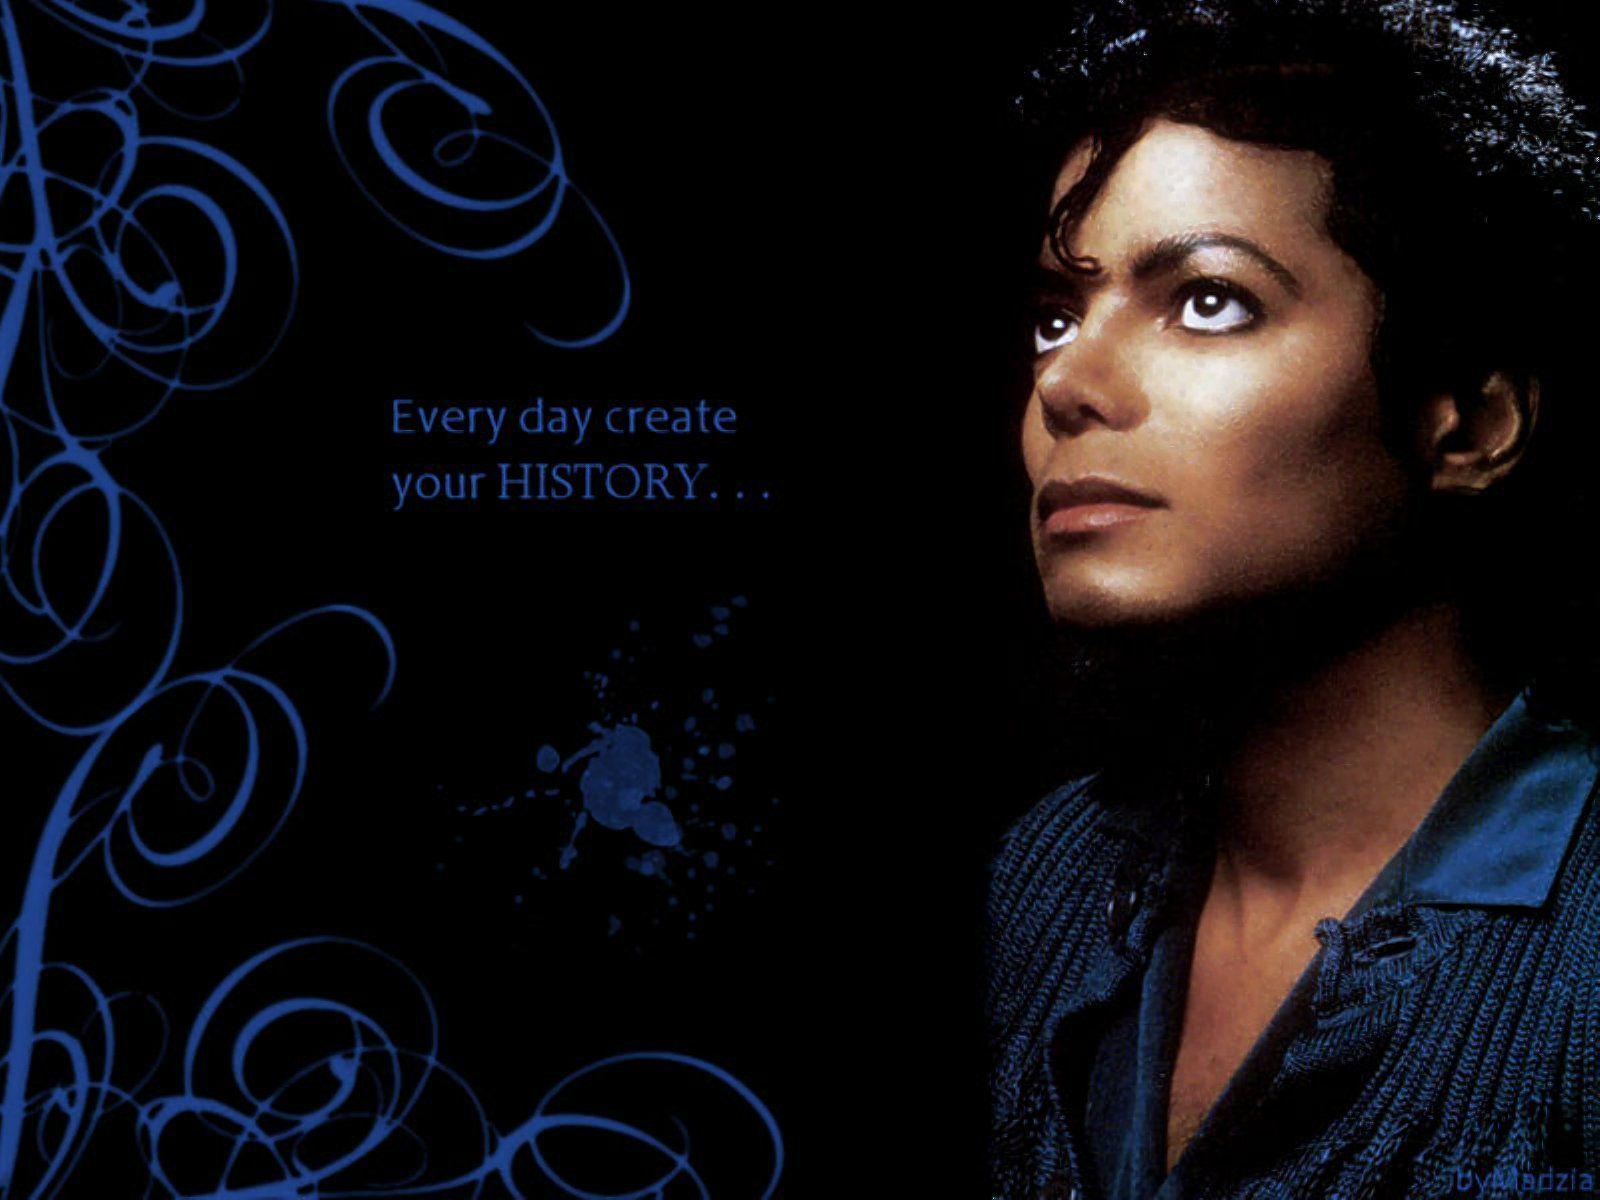 Michael Jackson image HIStory HD wallpaper and background